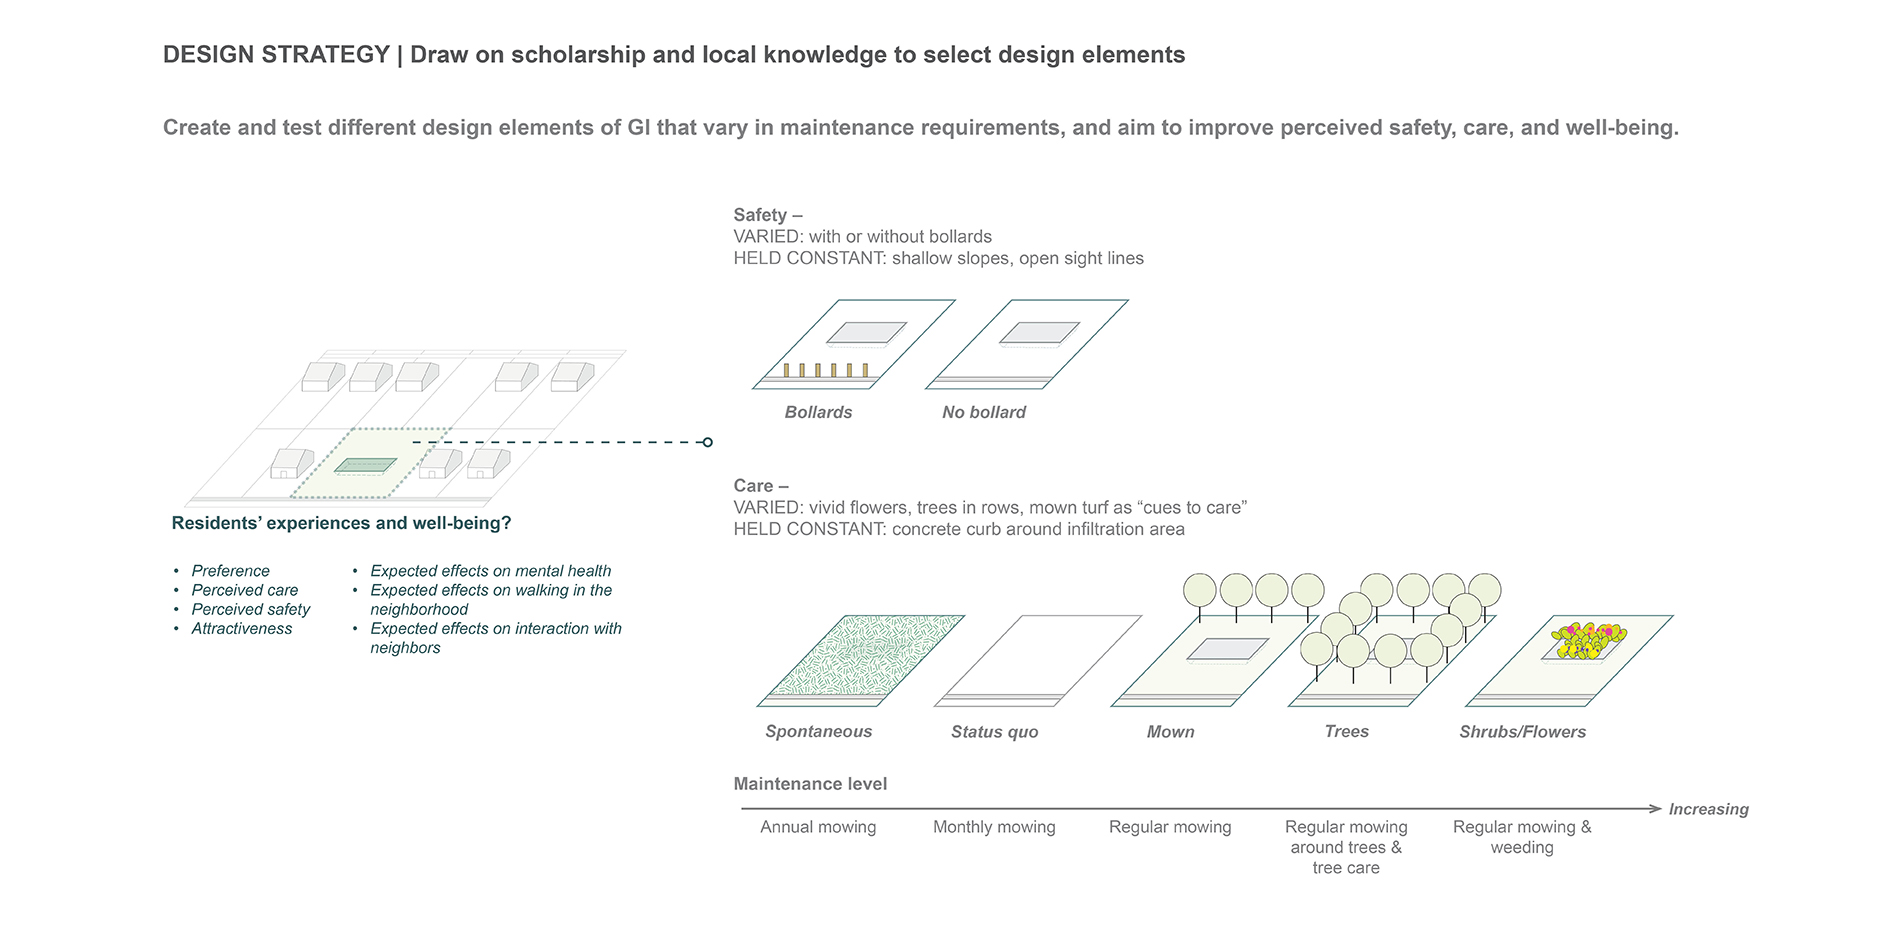 DESIGN STRATEGY: Draw on scholarship and local knowledge to select design elements